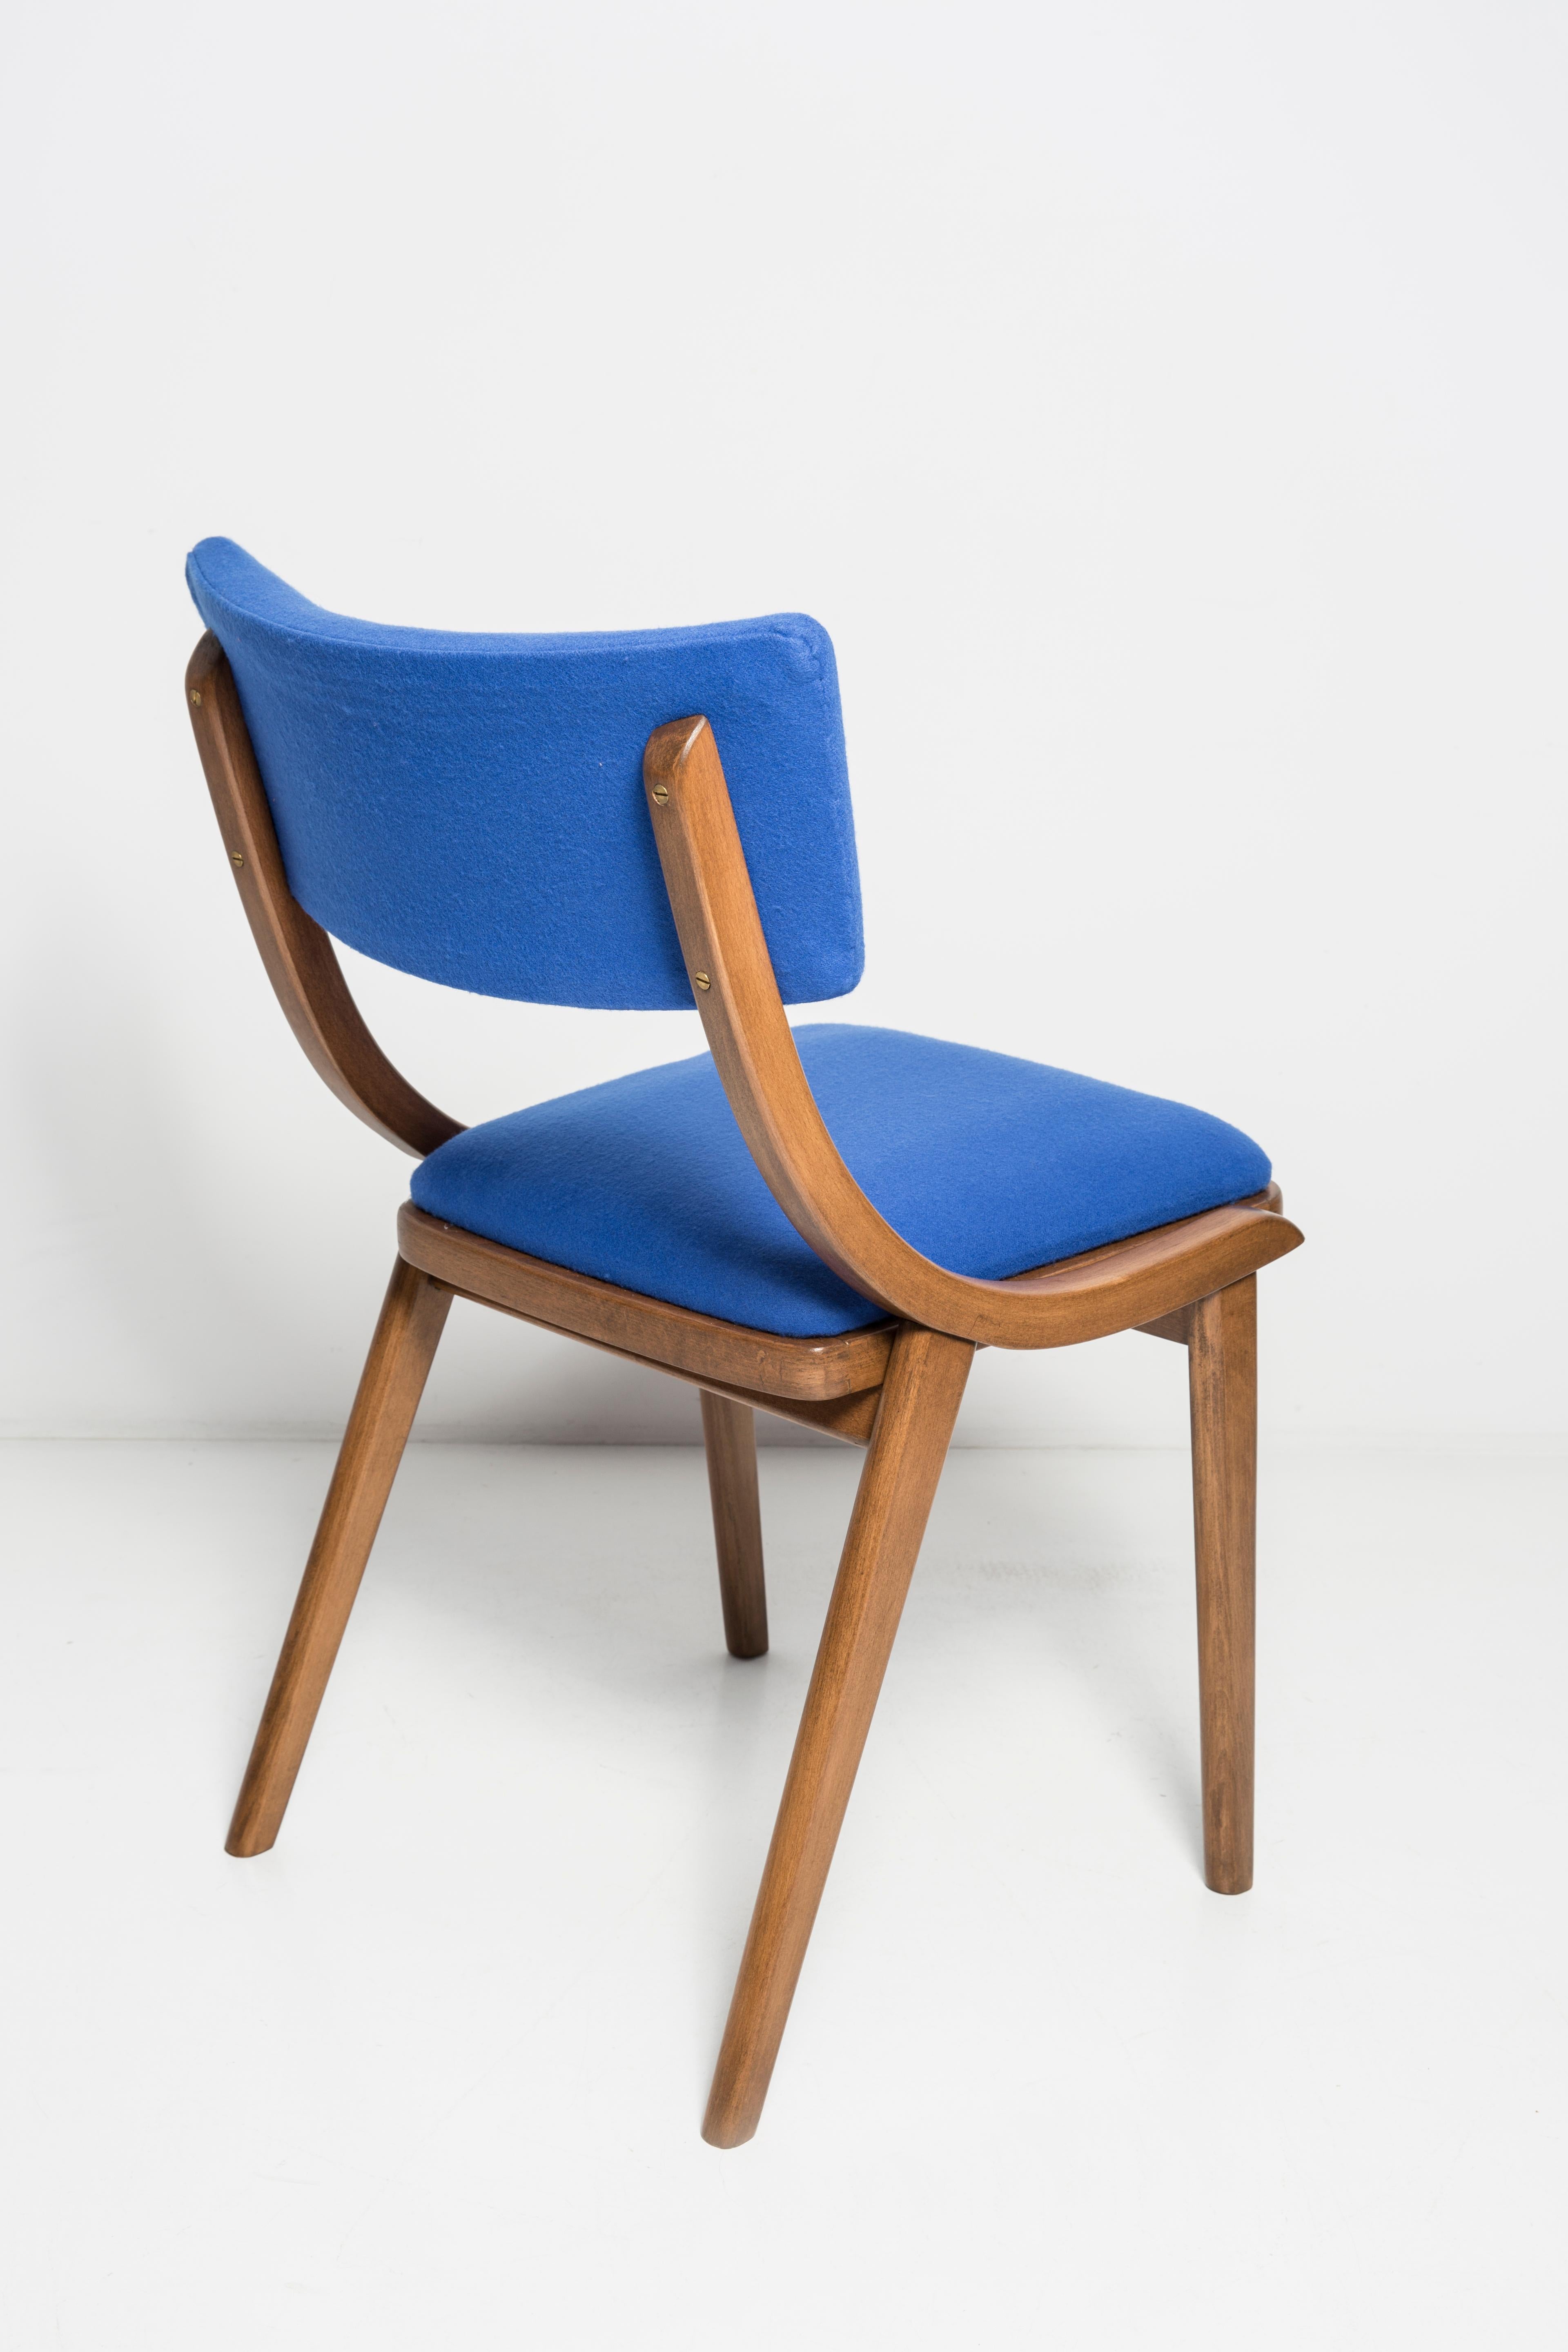 20th Century Set of Six Mid Century Modern Bumerang Chairs, Royal Blue Wool, Poland, 1960s For Sale